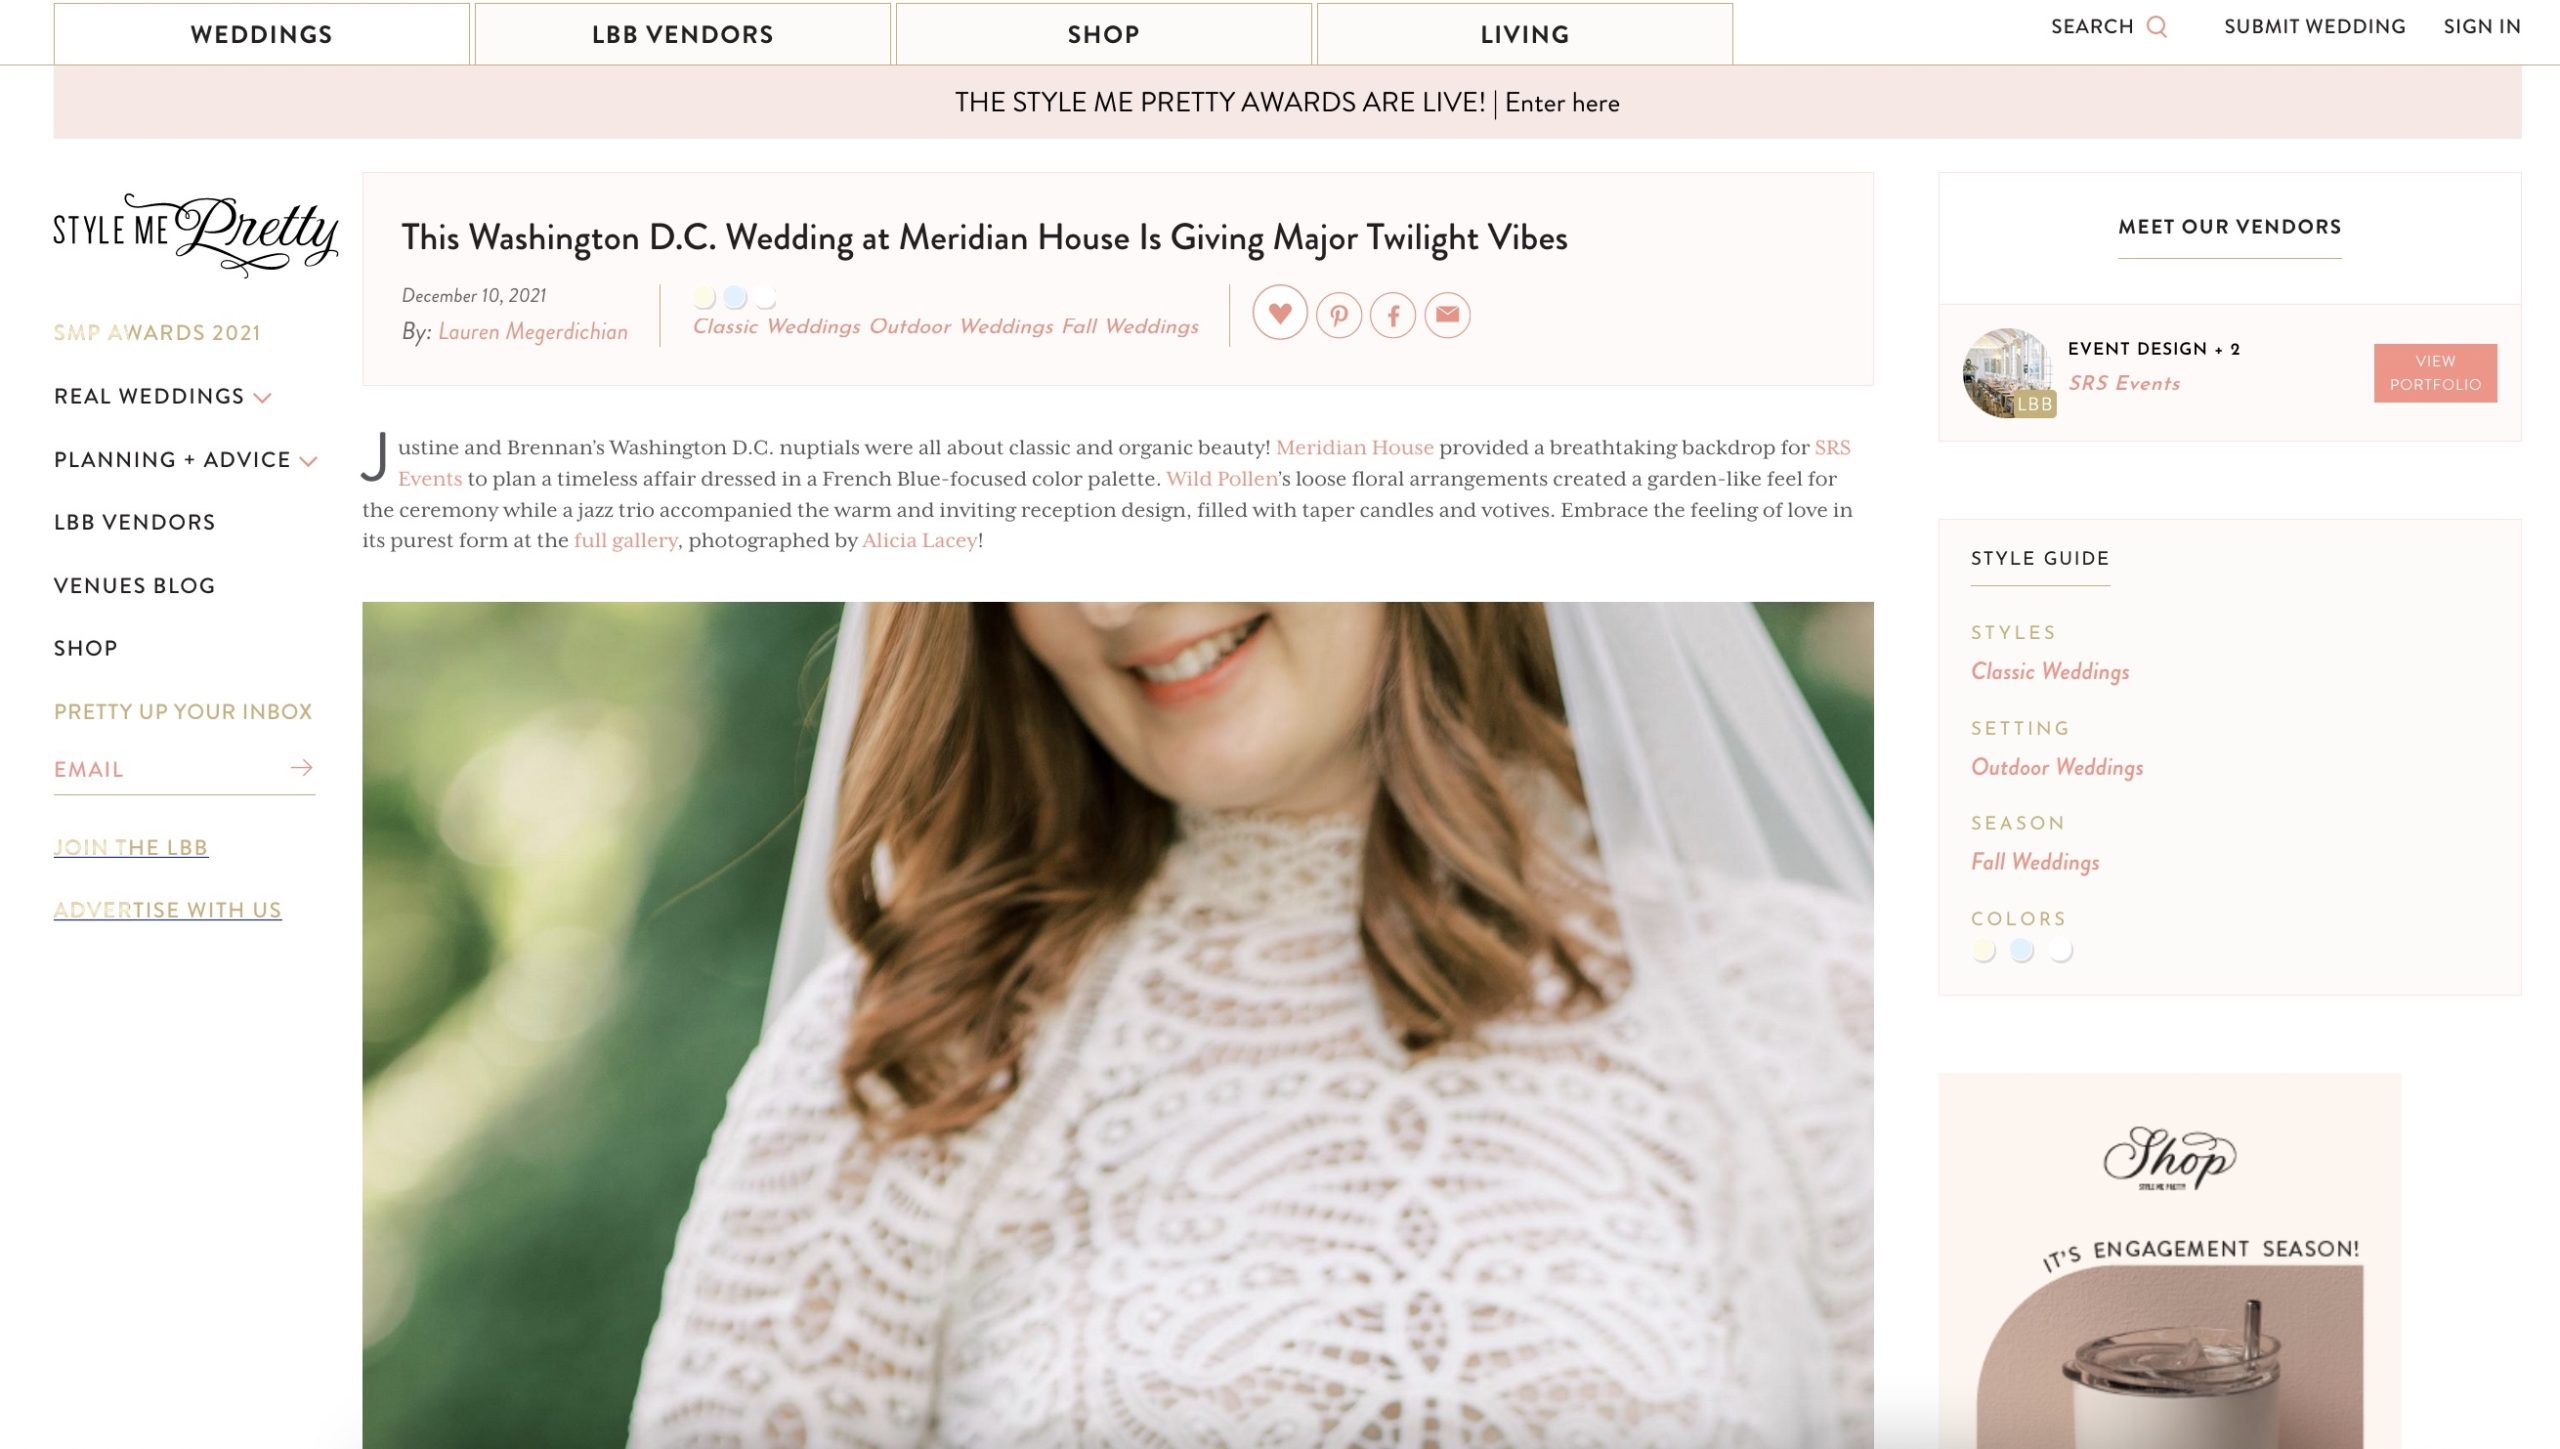 Washington, DC wedding photographer, Alicia Lacey, captured this stunning Meridian House wedding as featured on Style Me Pretty.